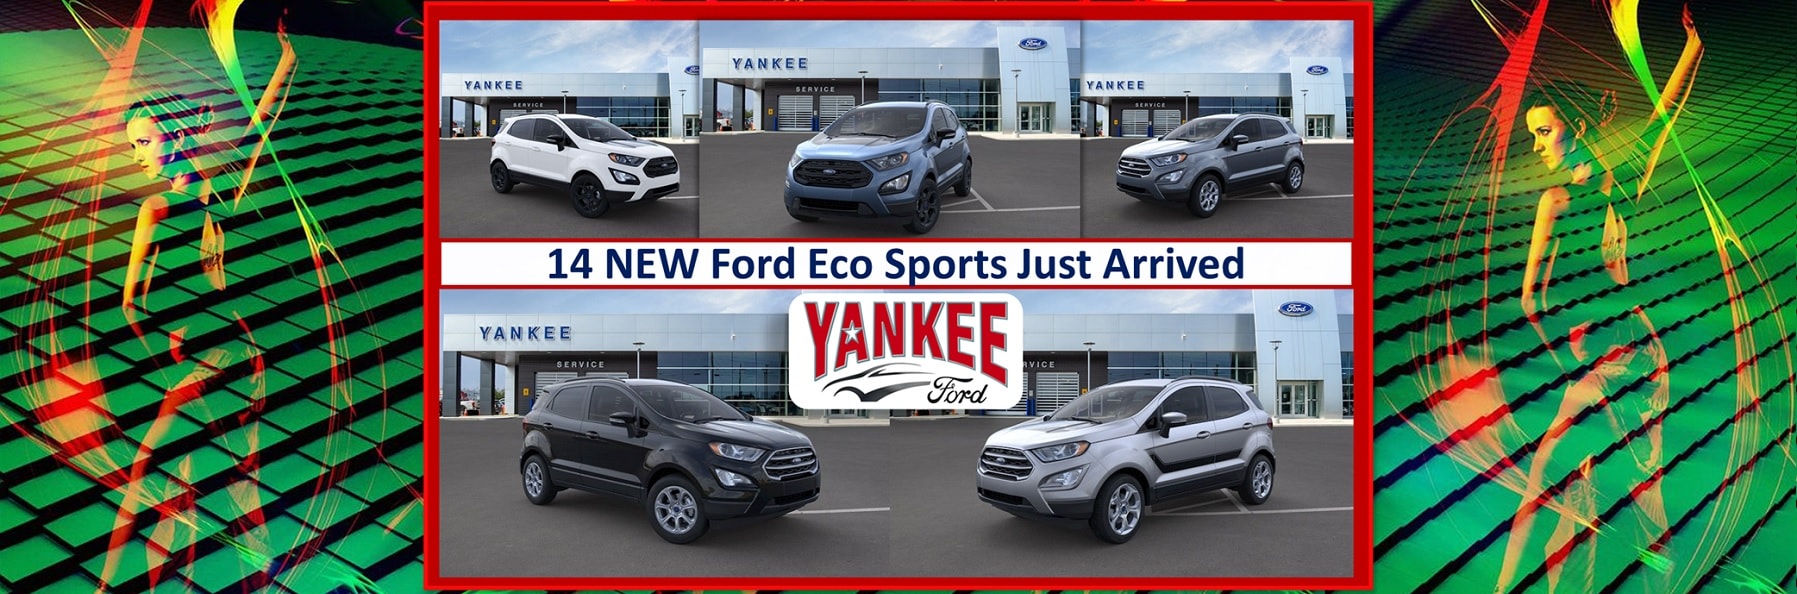 New Ford EcoSport vehicles at Yankee Ford in South Portland